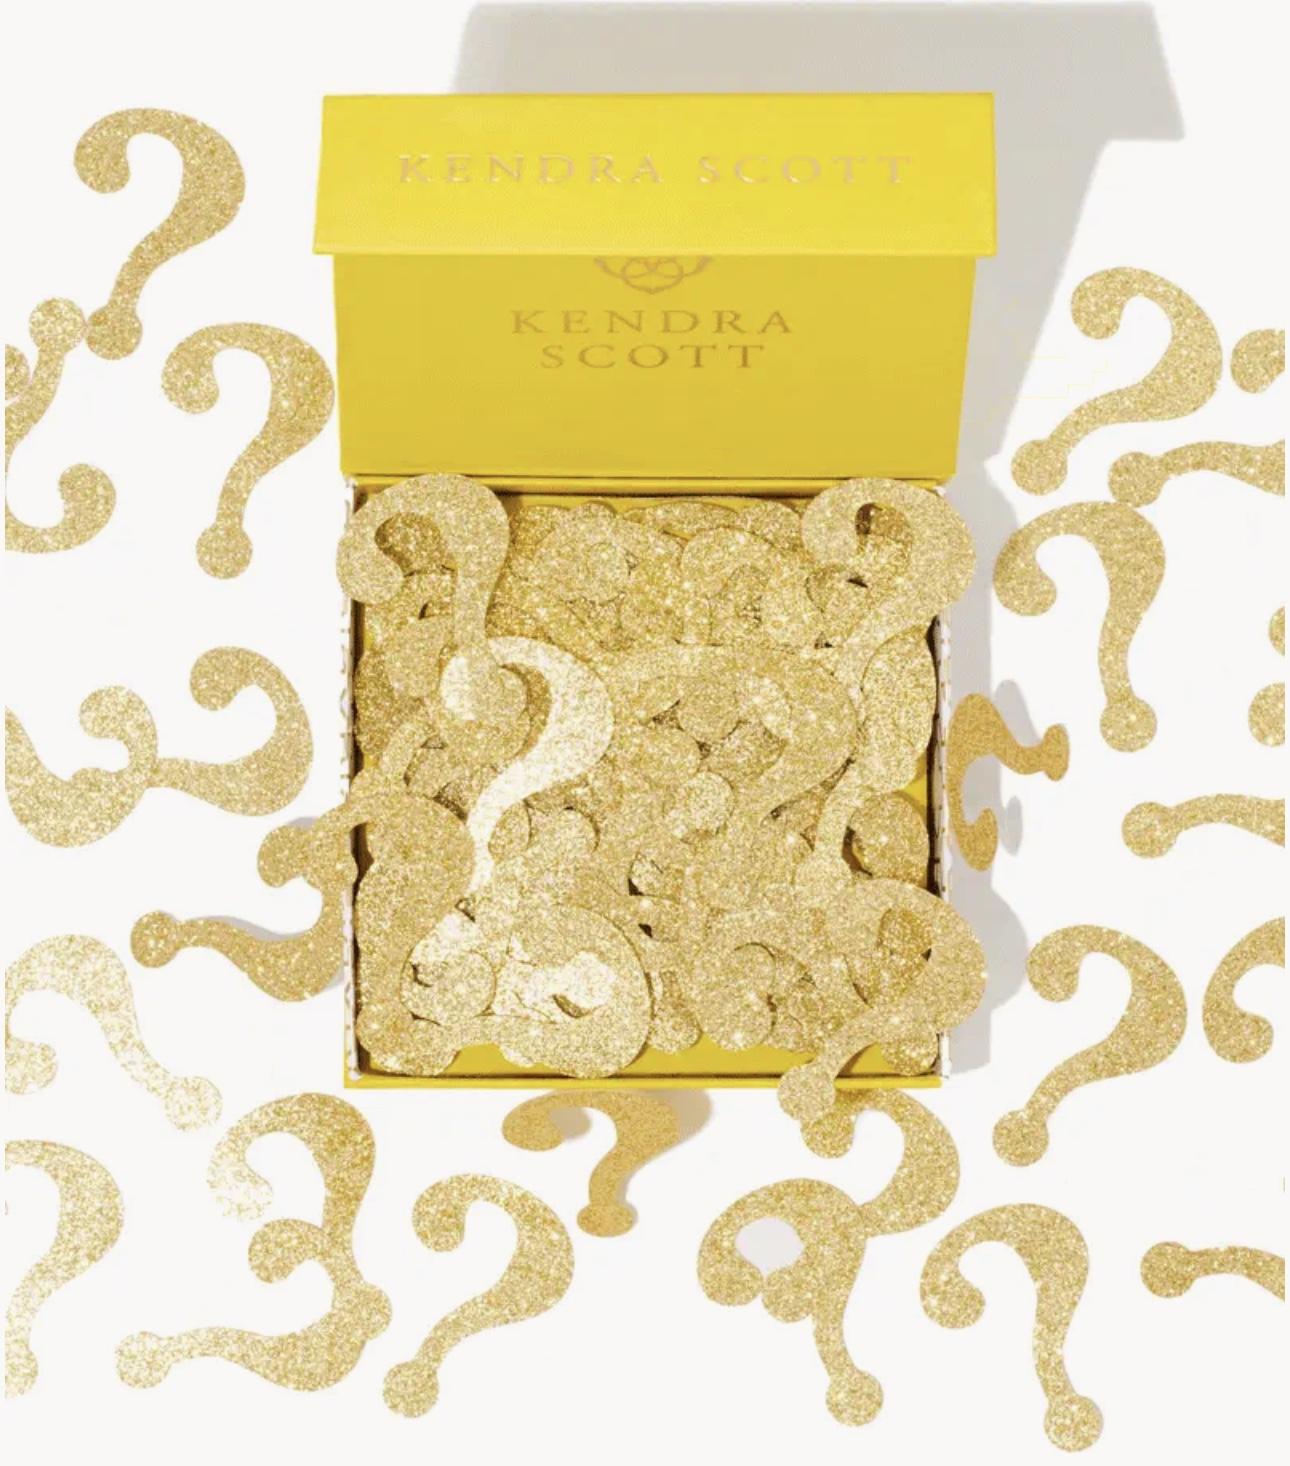 Read more about the article Kendra Scott Mystery Item – Now Available!